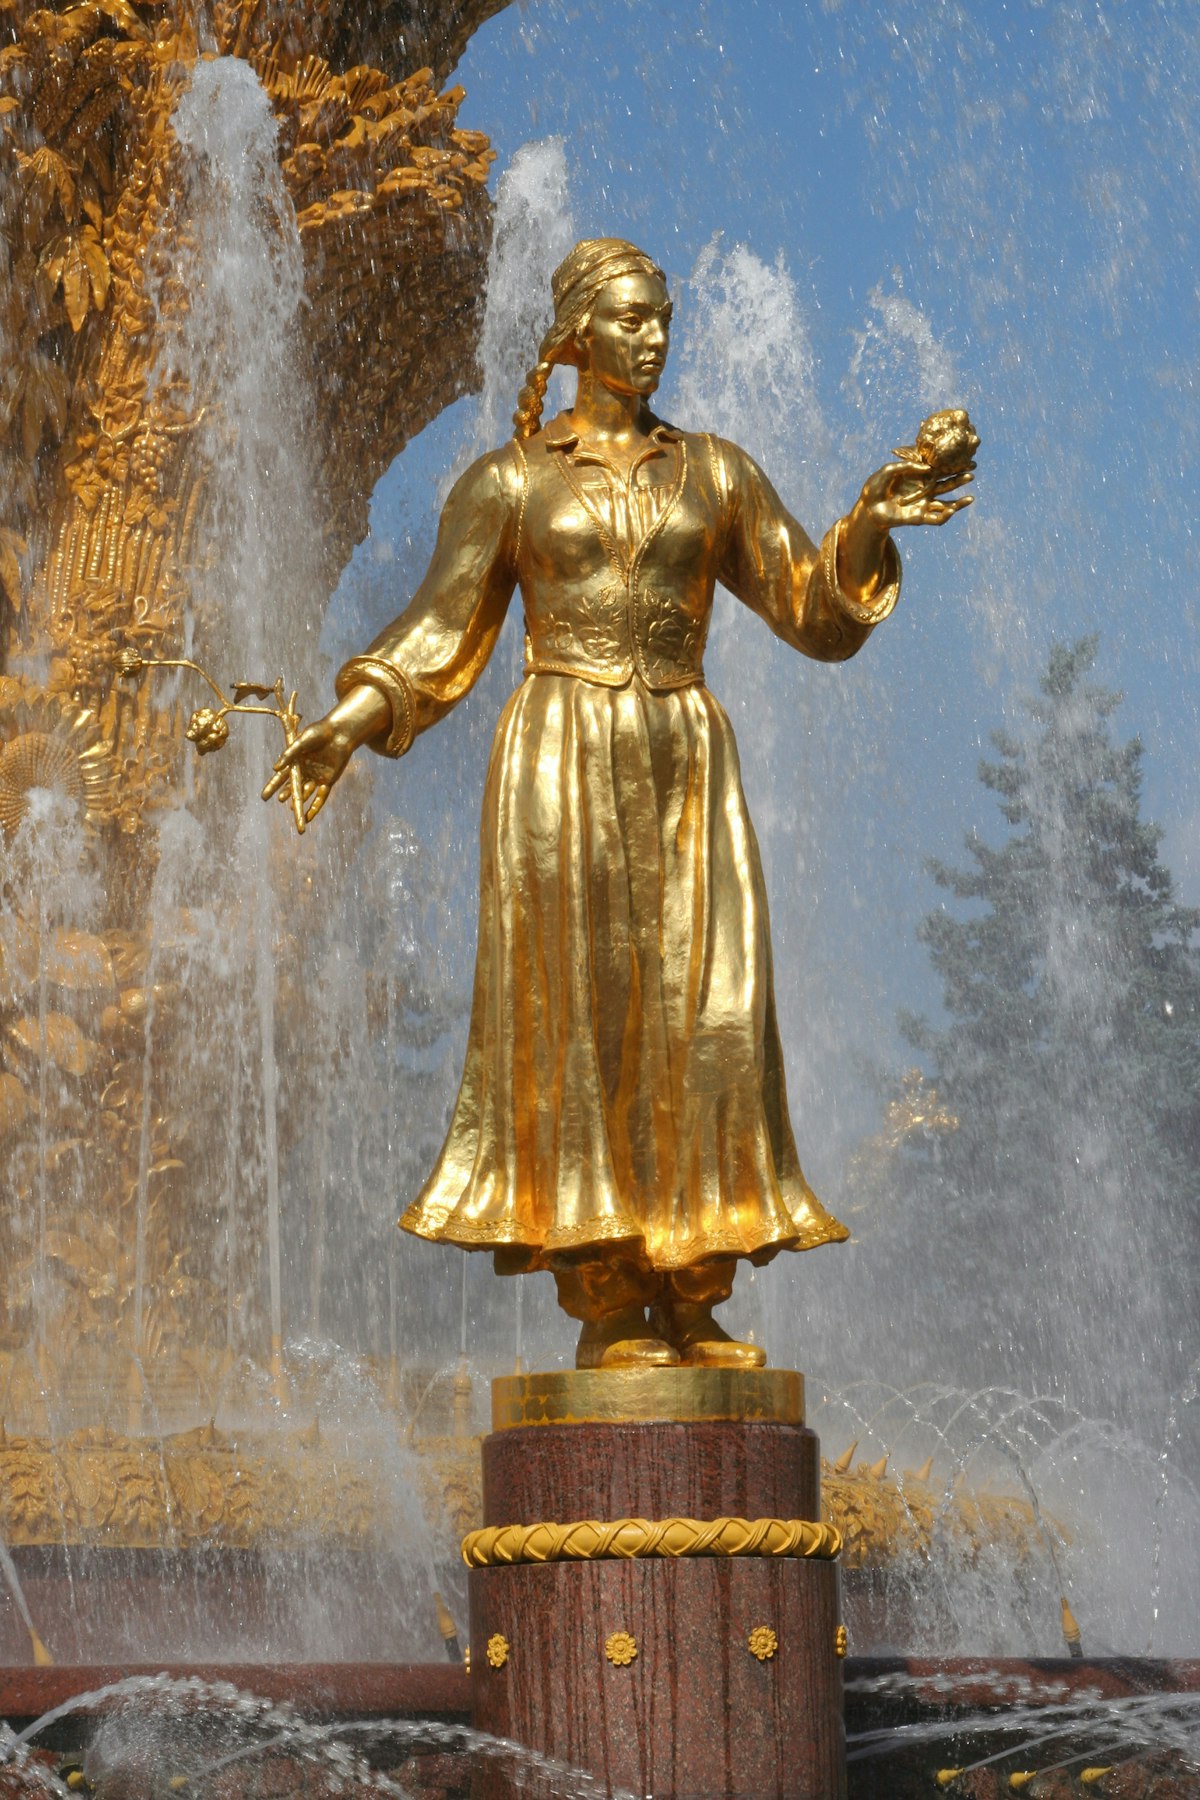 Golden statue in Friendship of the People Fountain at VDNKh (trade fair and amusement park).